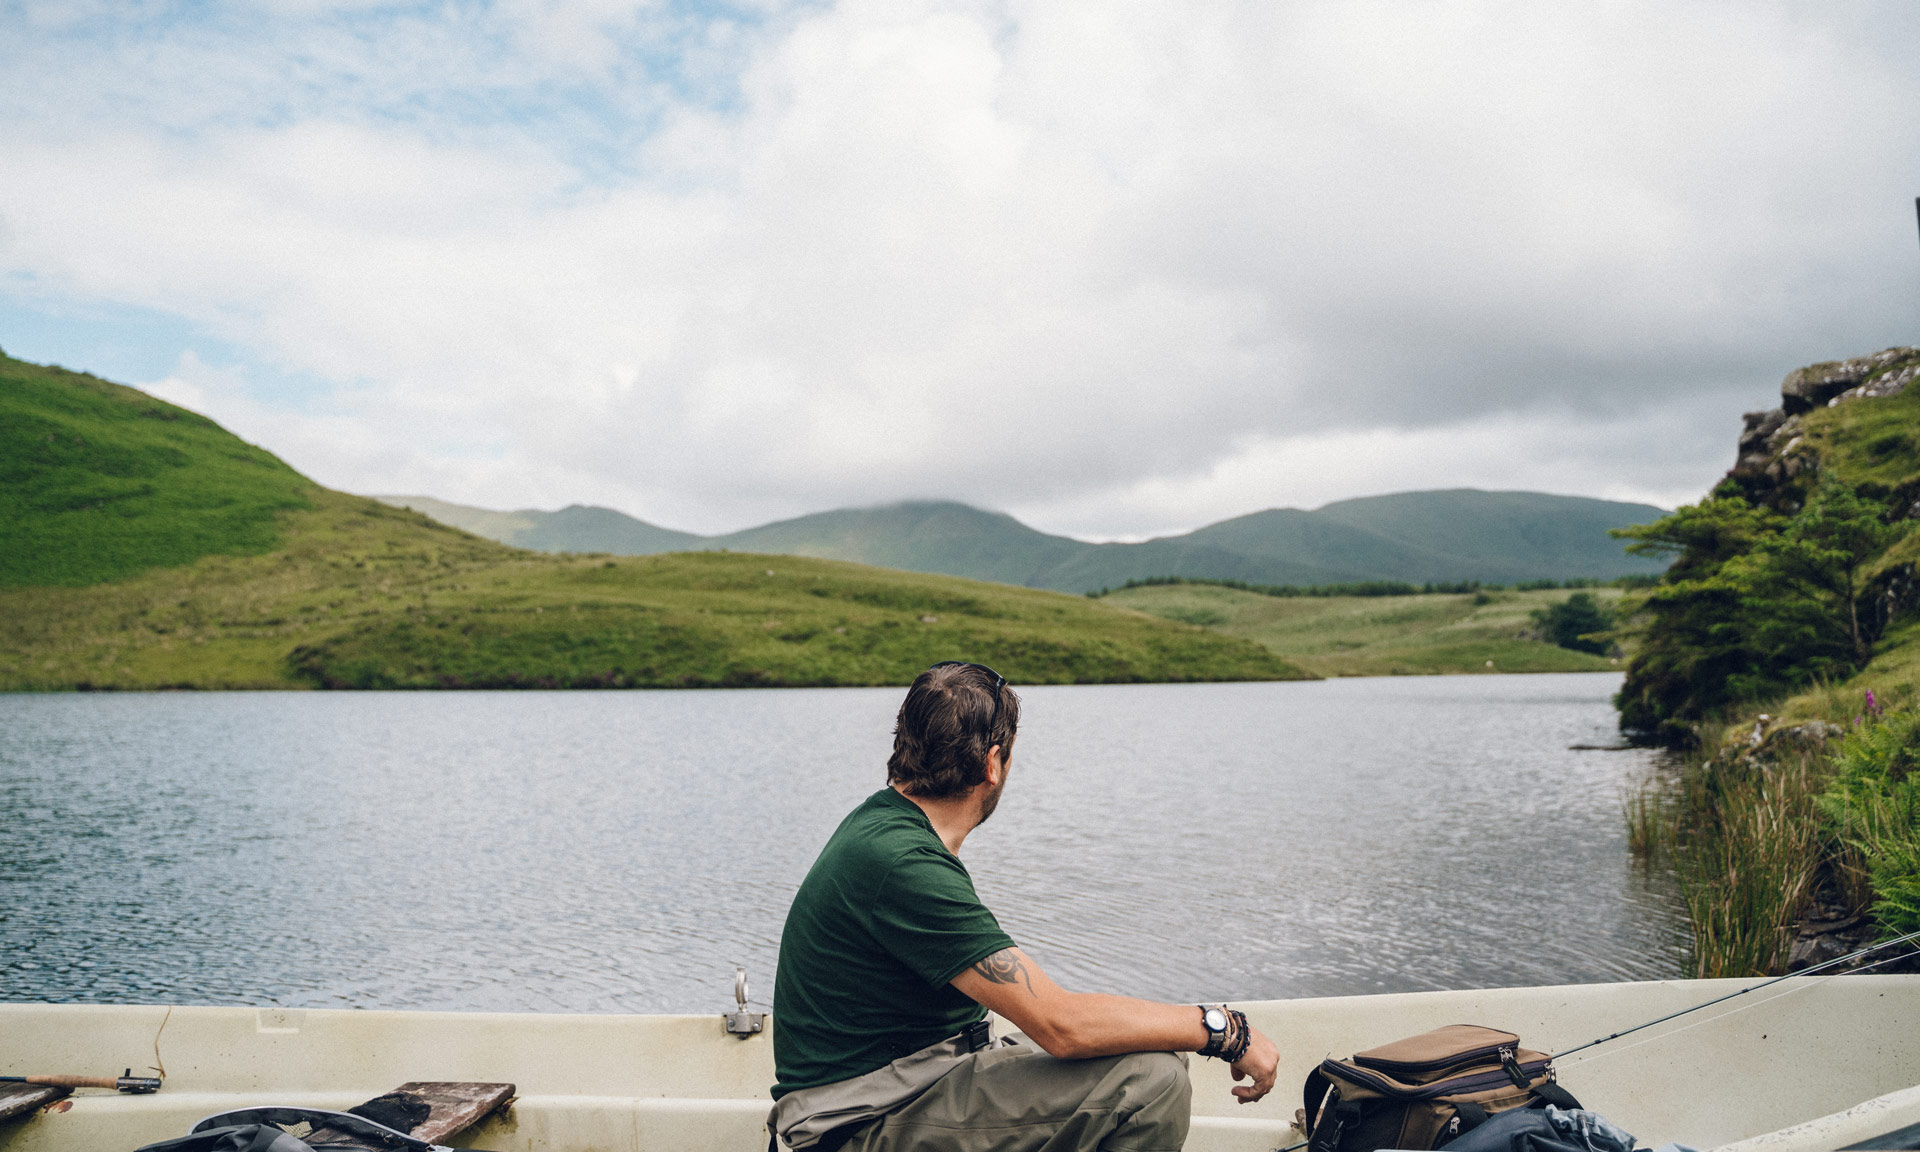 Fisherman looks over Llyn Dywarchen from his boat